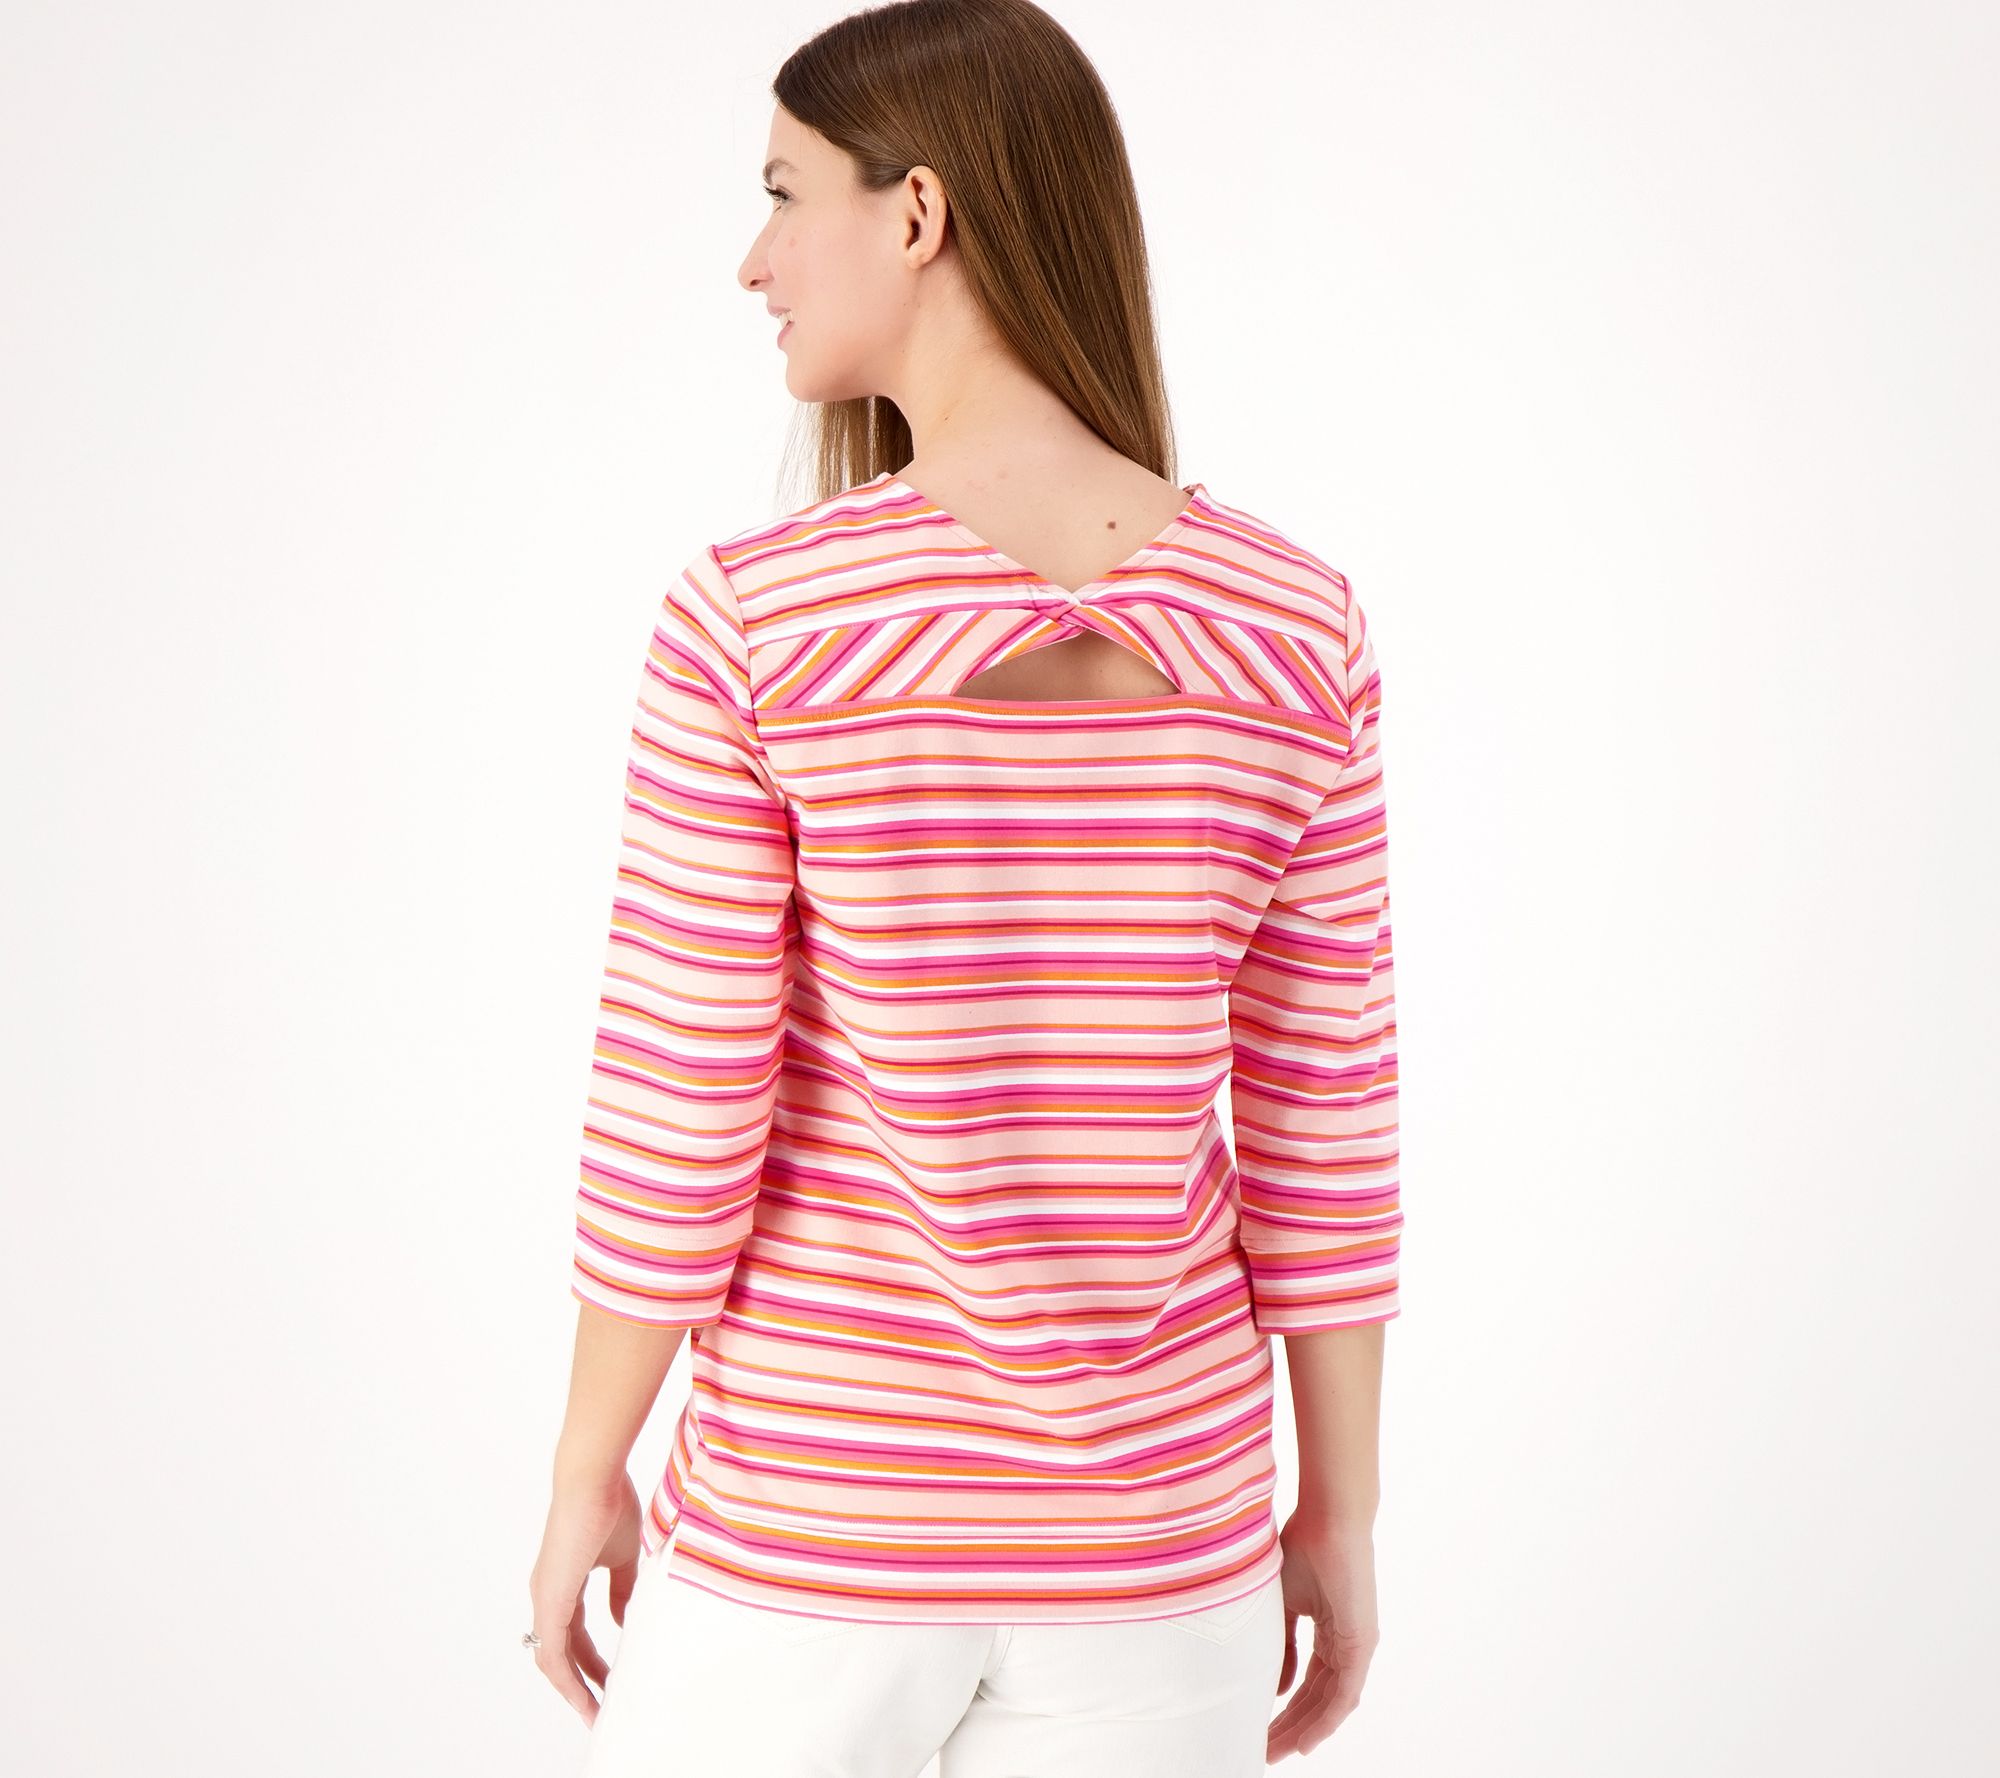 Denim & Co. Active Striped French Terry 3/4 Sleeve Top w/Back Detail